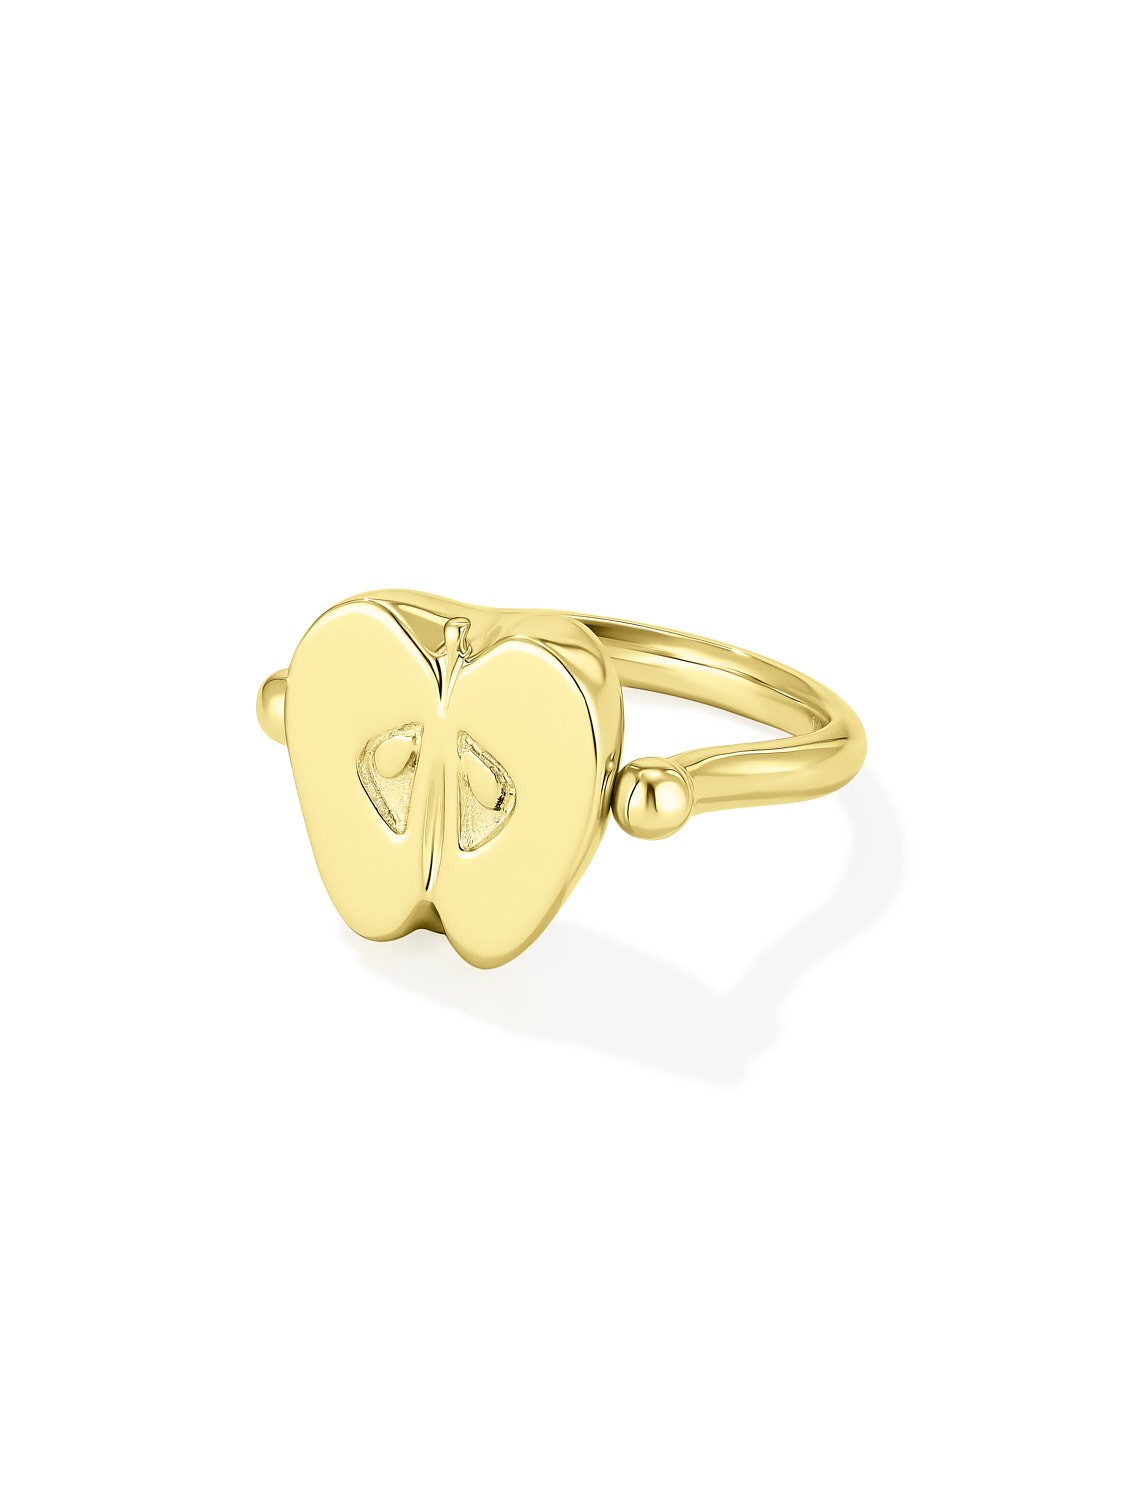 Half An Apple Flip Ring Gold-plated